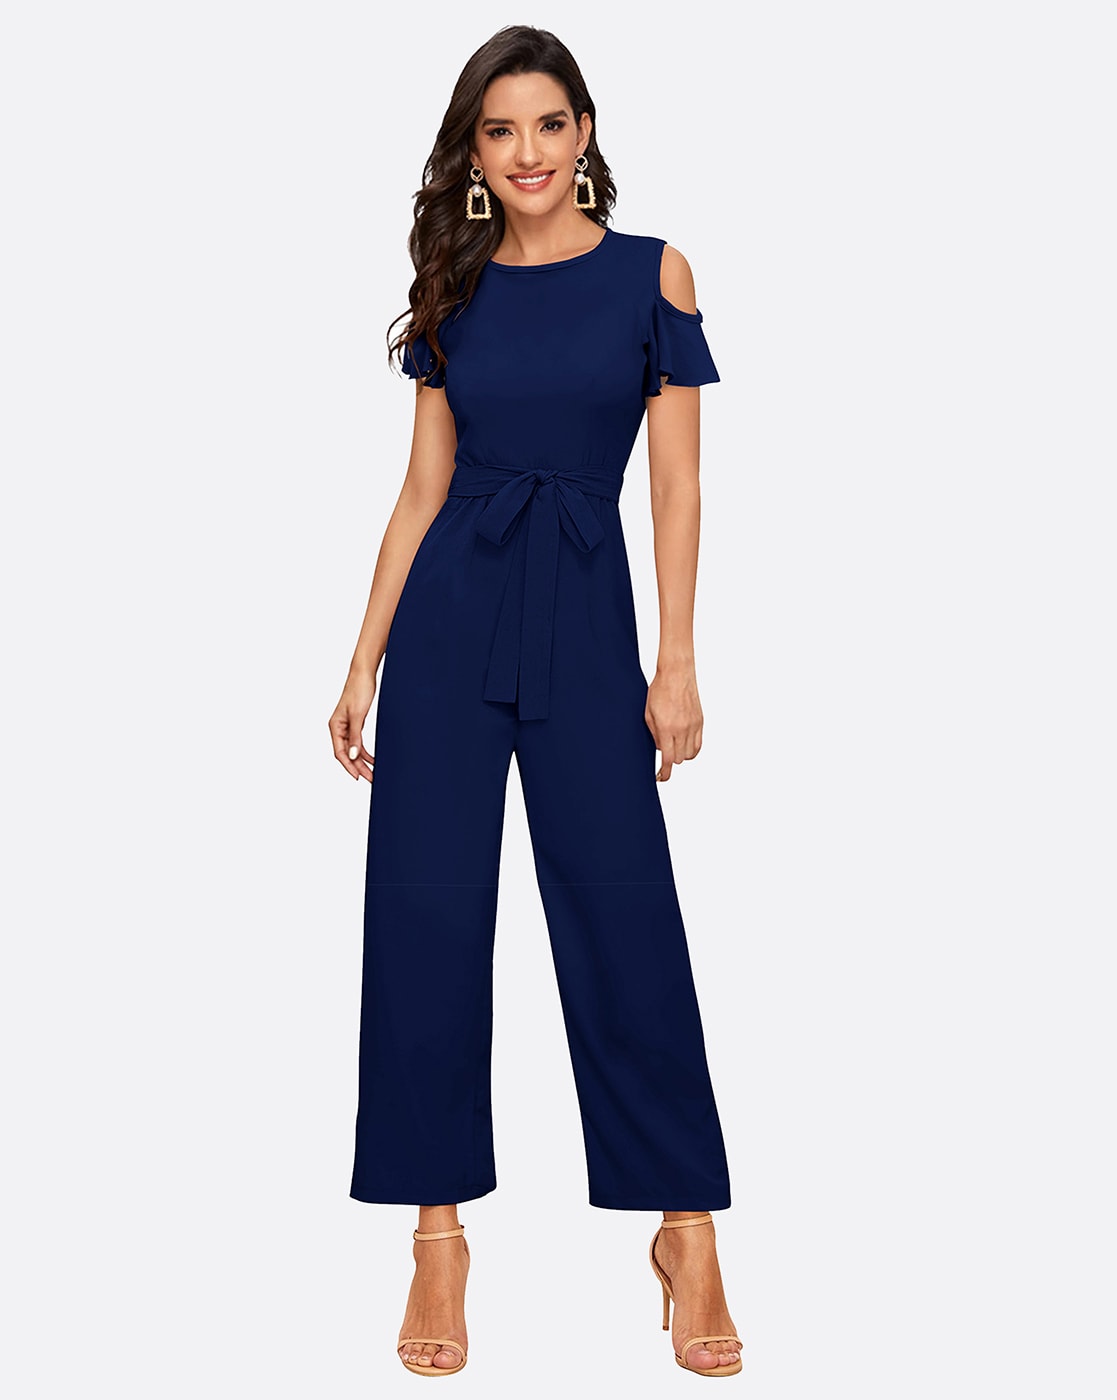 Better Than Before Jumpsuit Navy | Jumpsuit outfit wedding, Blue jumpsuits  outfit, Pretty outfits